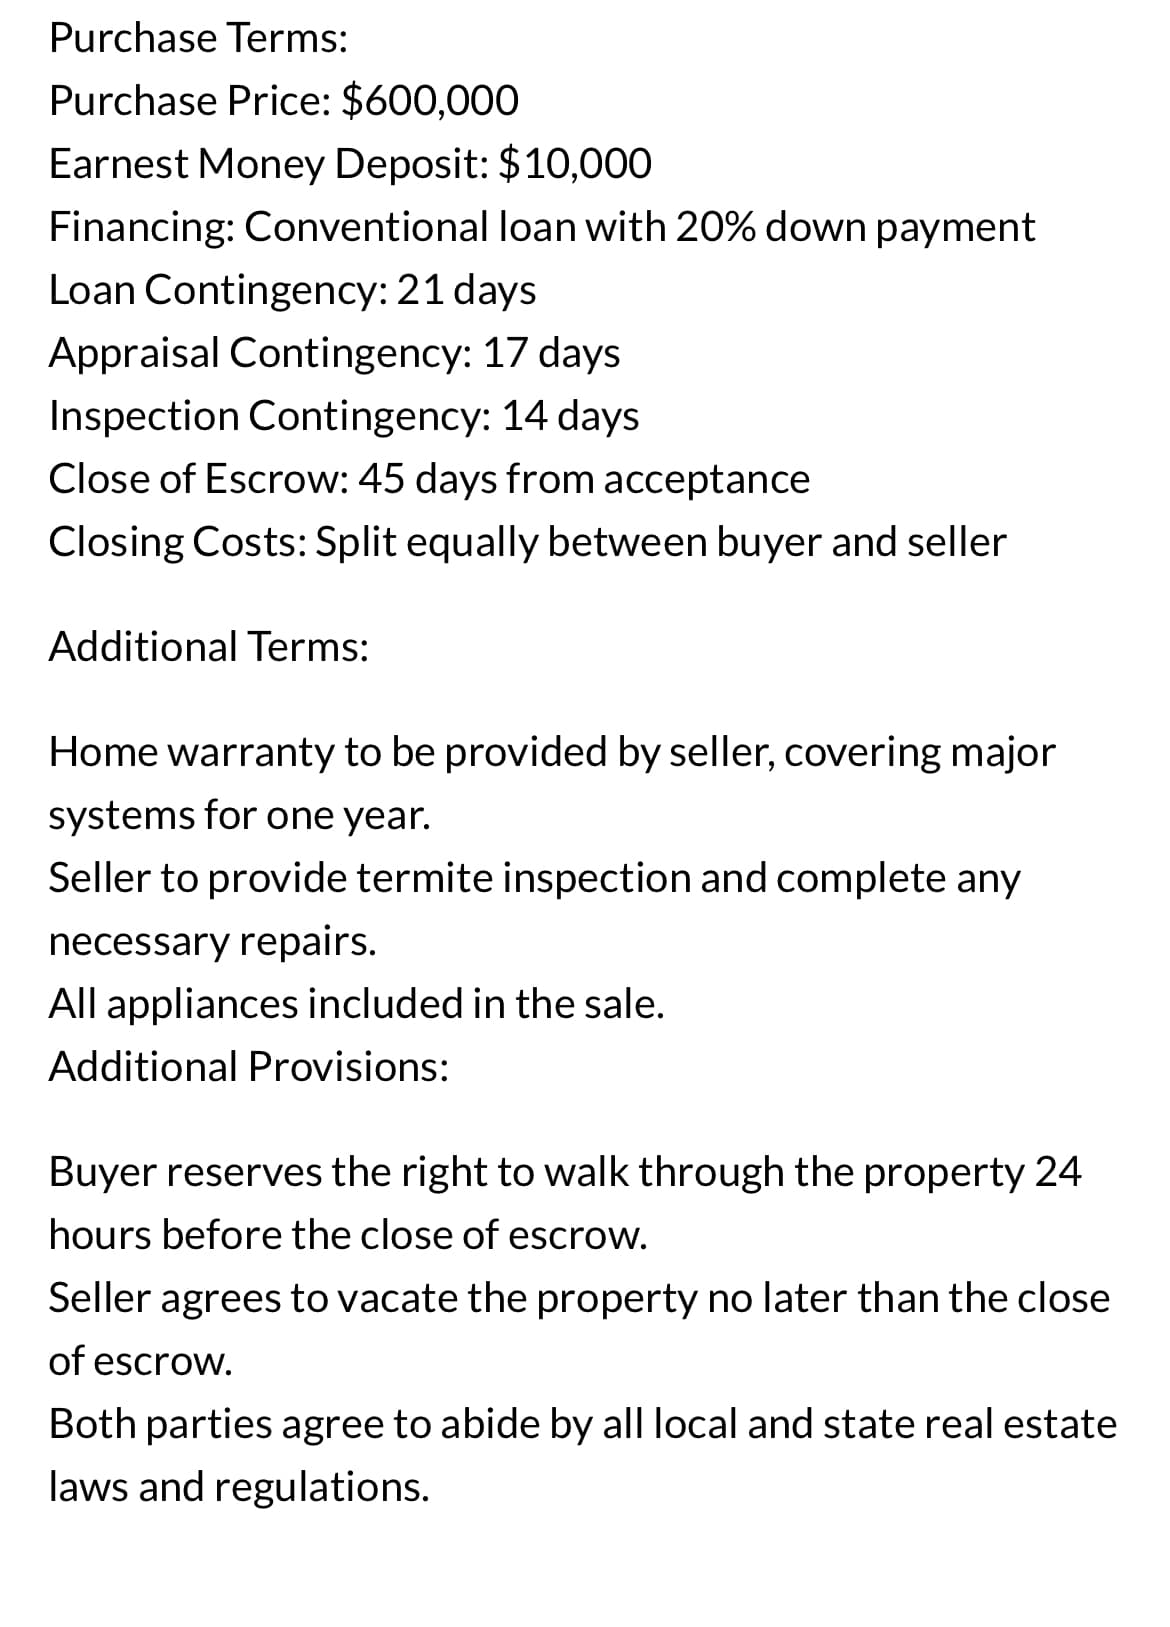 Purchase Terms:
Purchase Price: $600,000
Earnest Money Deposit: $10,000
Financing: Conventional loan with 20% down payment
Loan Contingency: 21 days
Appraisal Contingency: 17 days
Inspection Contingency: 14 days
Close of Escrow: 45 days from acceptance
Closing Costs: Split equally between buyer and seller
Additional Terms:
Home warranty to be provided by seller, covering major
systems for one year.
Seller to provide termite inspection and complete any
necessary repairs.
All appliances included in the sale.
Additional Provisions:
Buyer reserves the right to walk through the property 24
hours before the close of escrow.
Seller agrees to vacate the property no later than the close
of escrow.
Both parties agree to abide by all local and state real estate
laws and regulations.